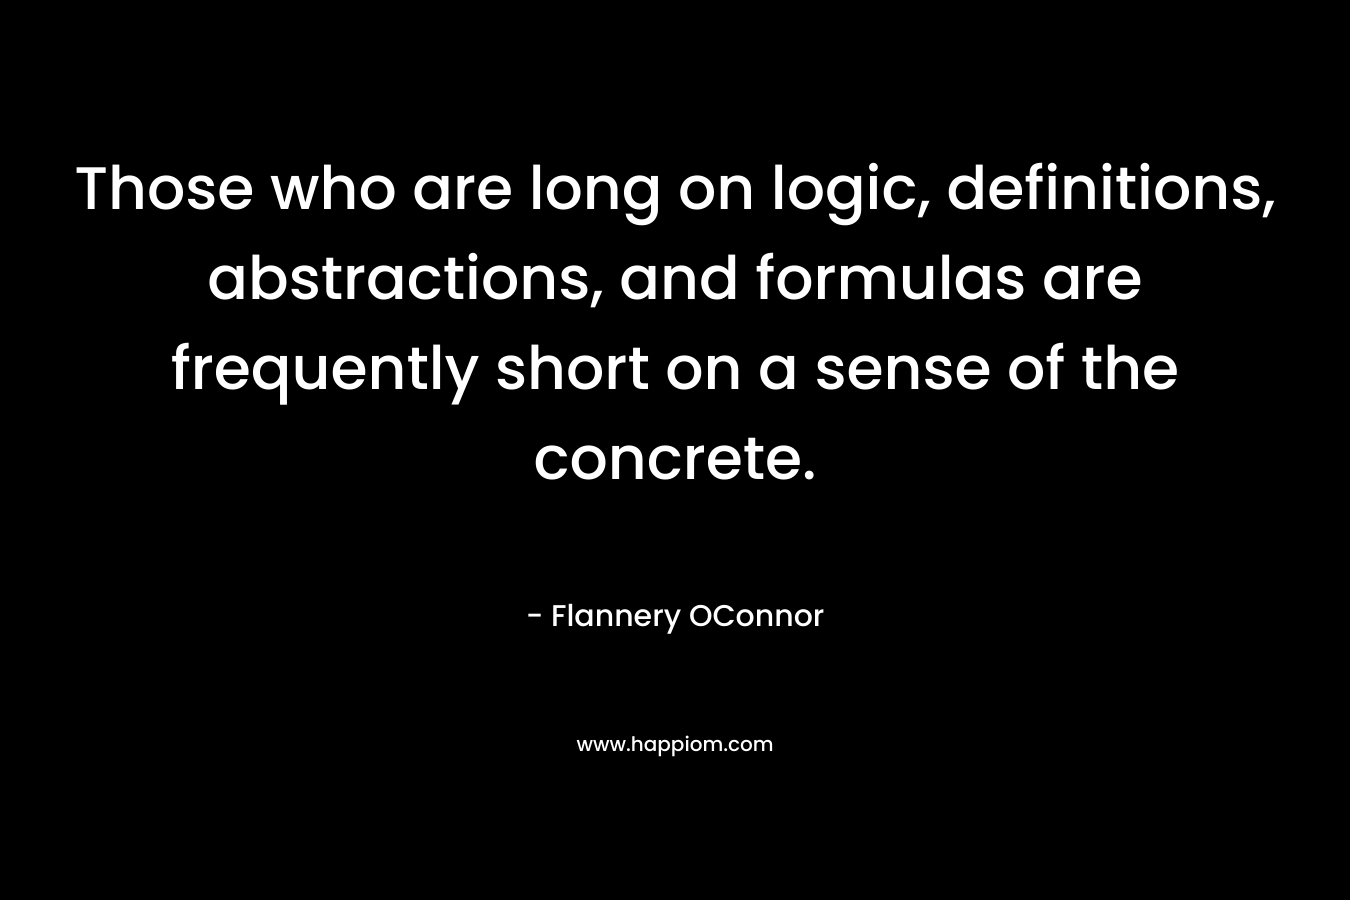 Those who are long on logic, definitions, abstractions, and formulas are frequently short on a sense of the concrete.